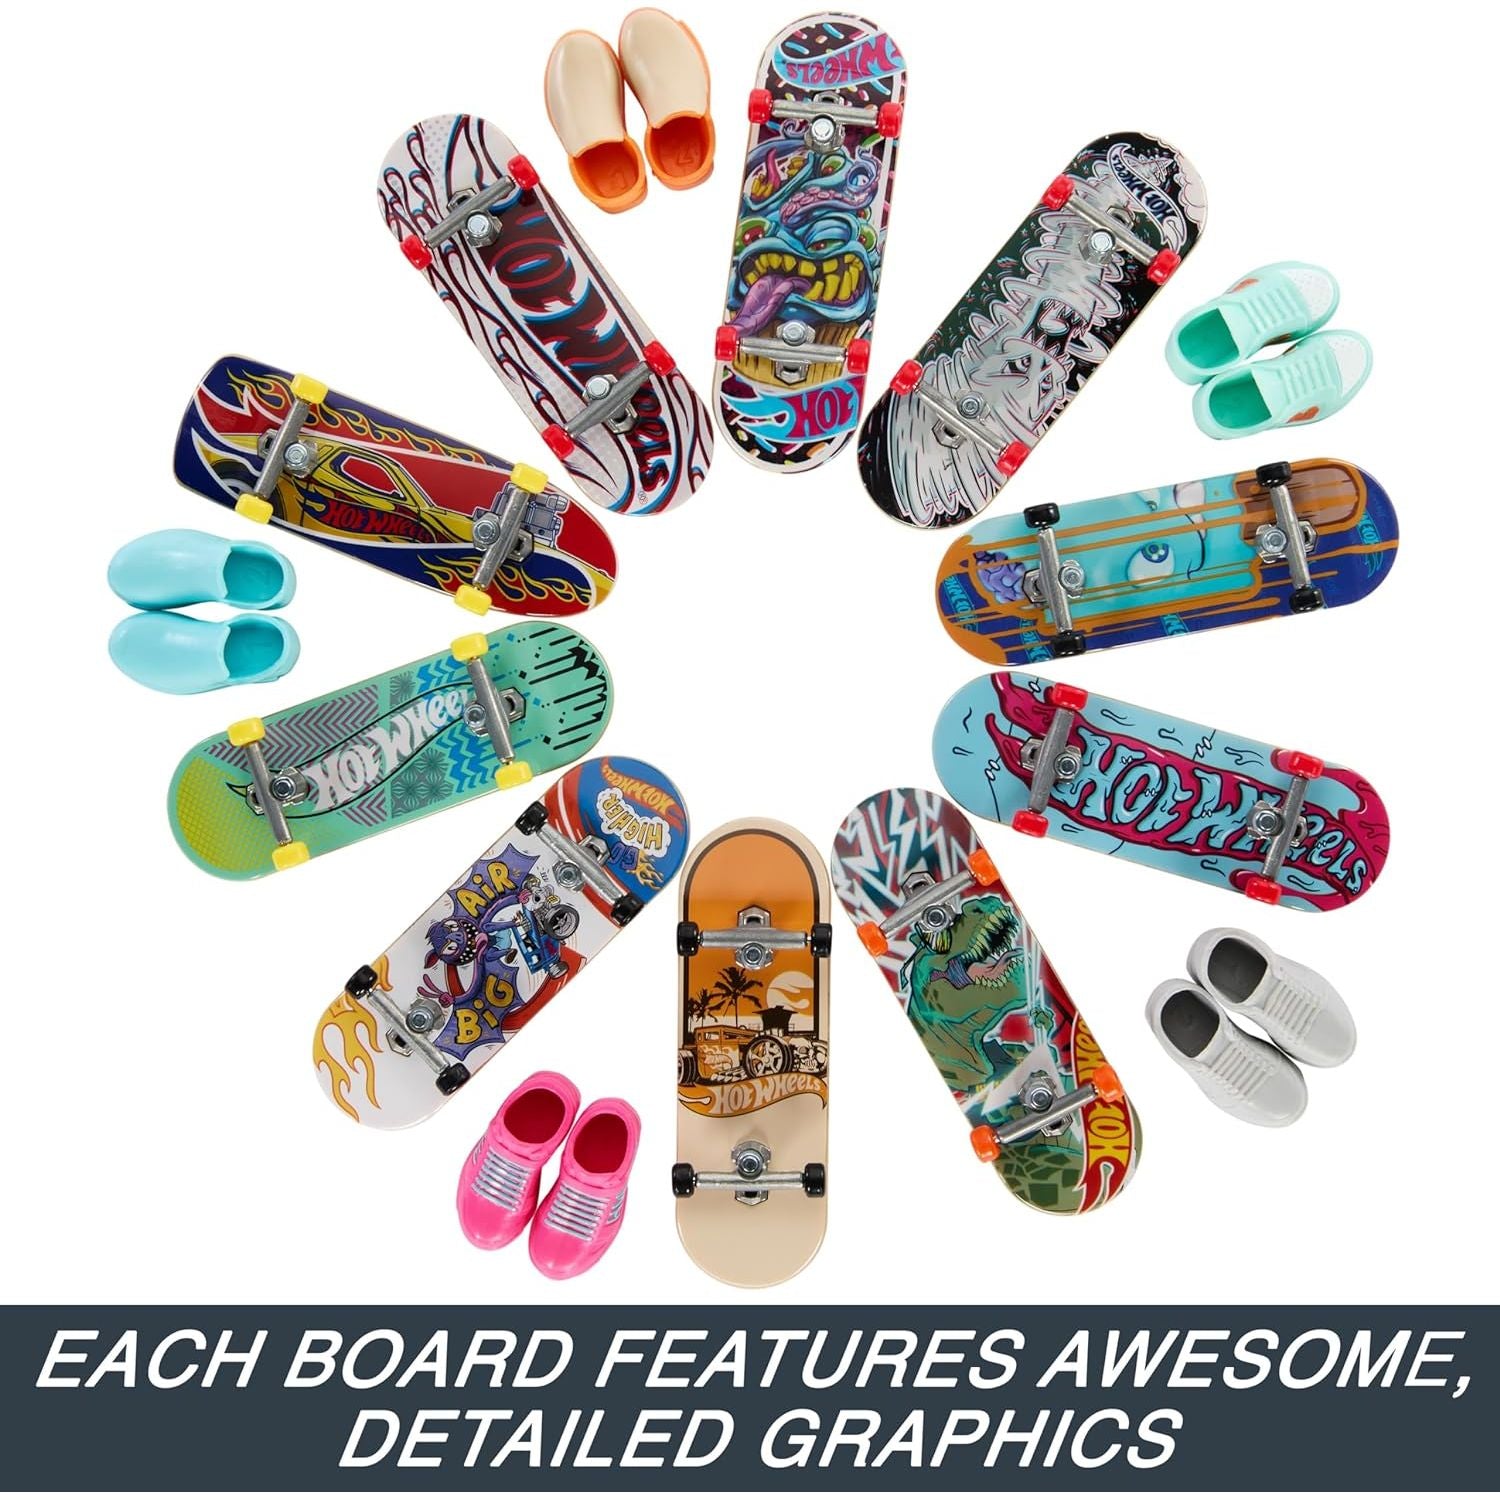 Hot Wheels Skate Fingerboards 10-Pack, Set of 10 Finger Skateboards with 5 Pairs of Removable Skate Shoes Themed Graphics